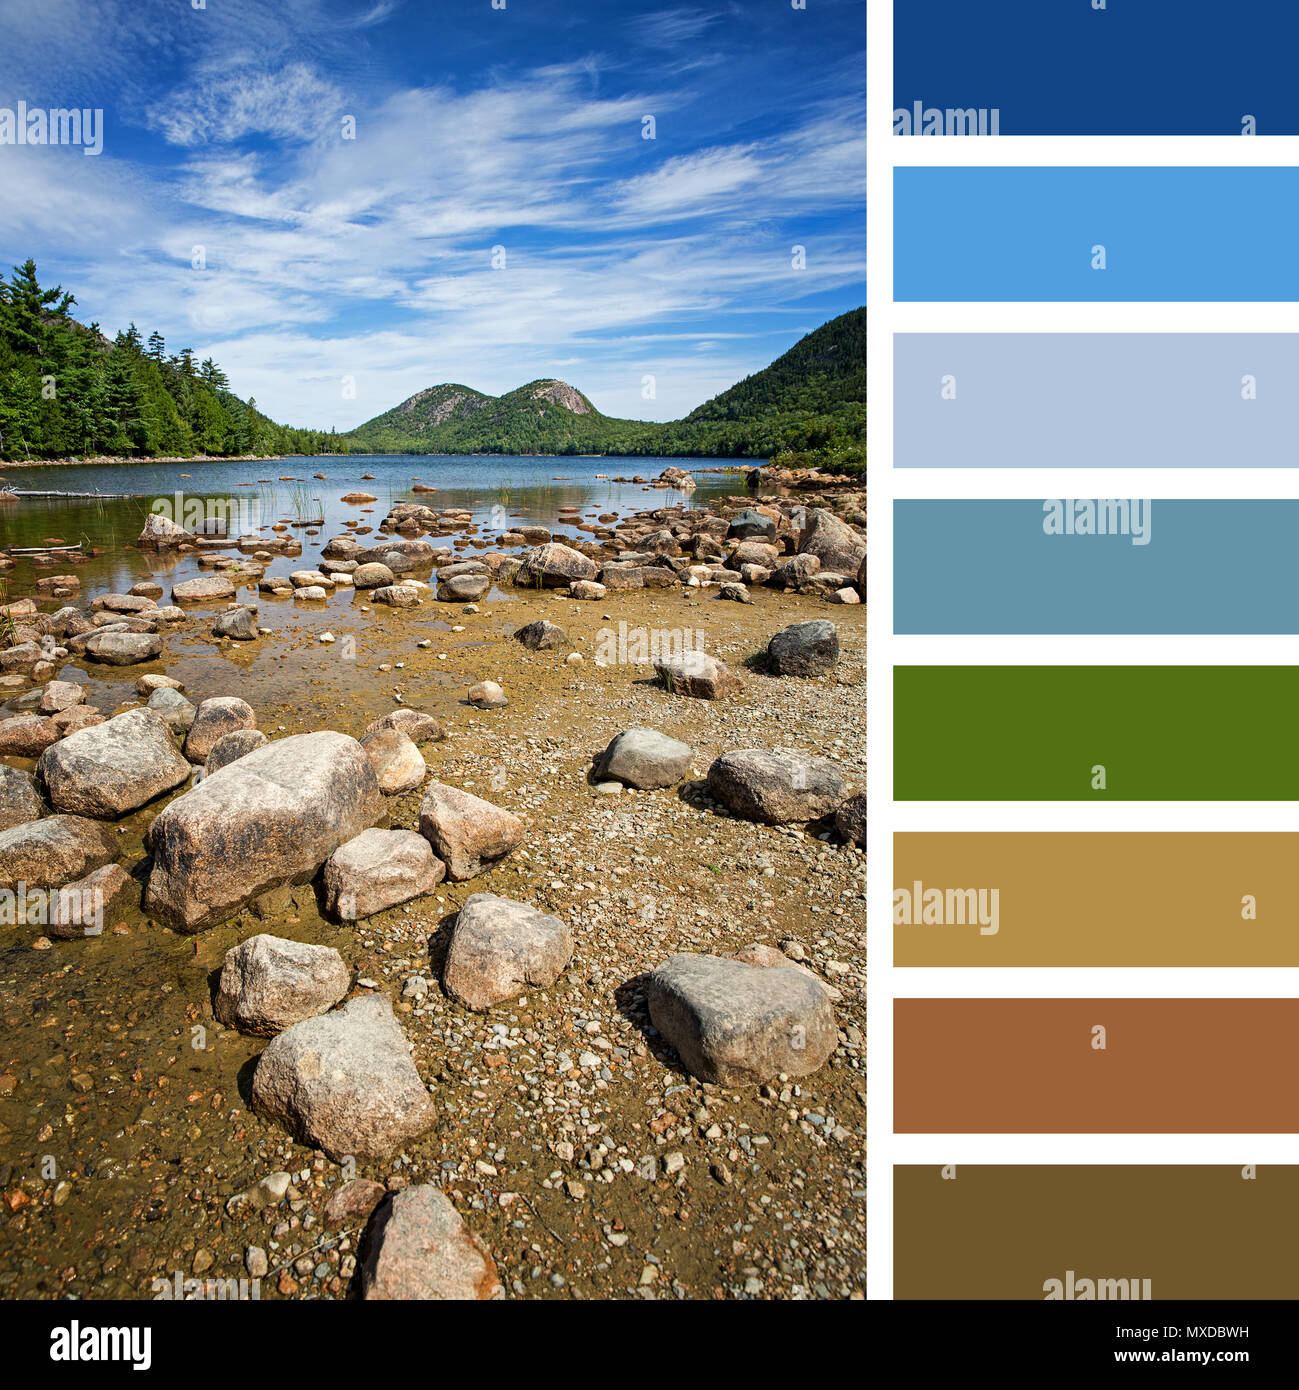 Jordan Pond, Acadia National Park, Mount Desert Island, maine, USA. In a colour palette with complimentary colour swatches. Stock Photo